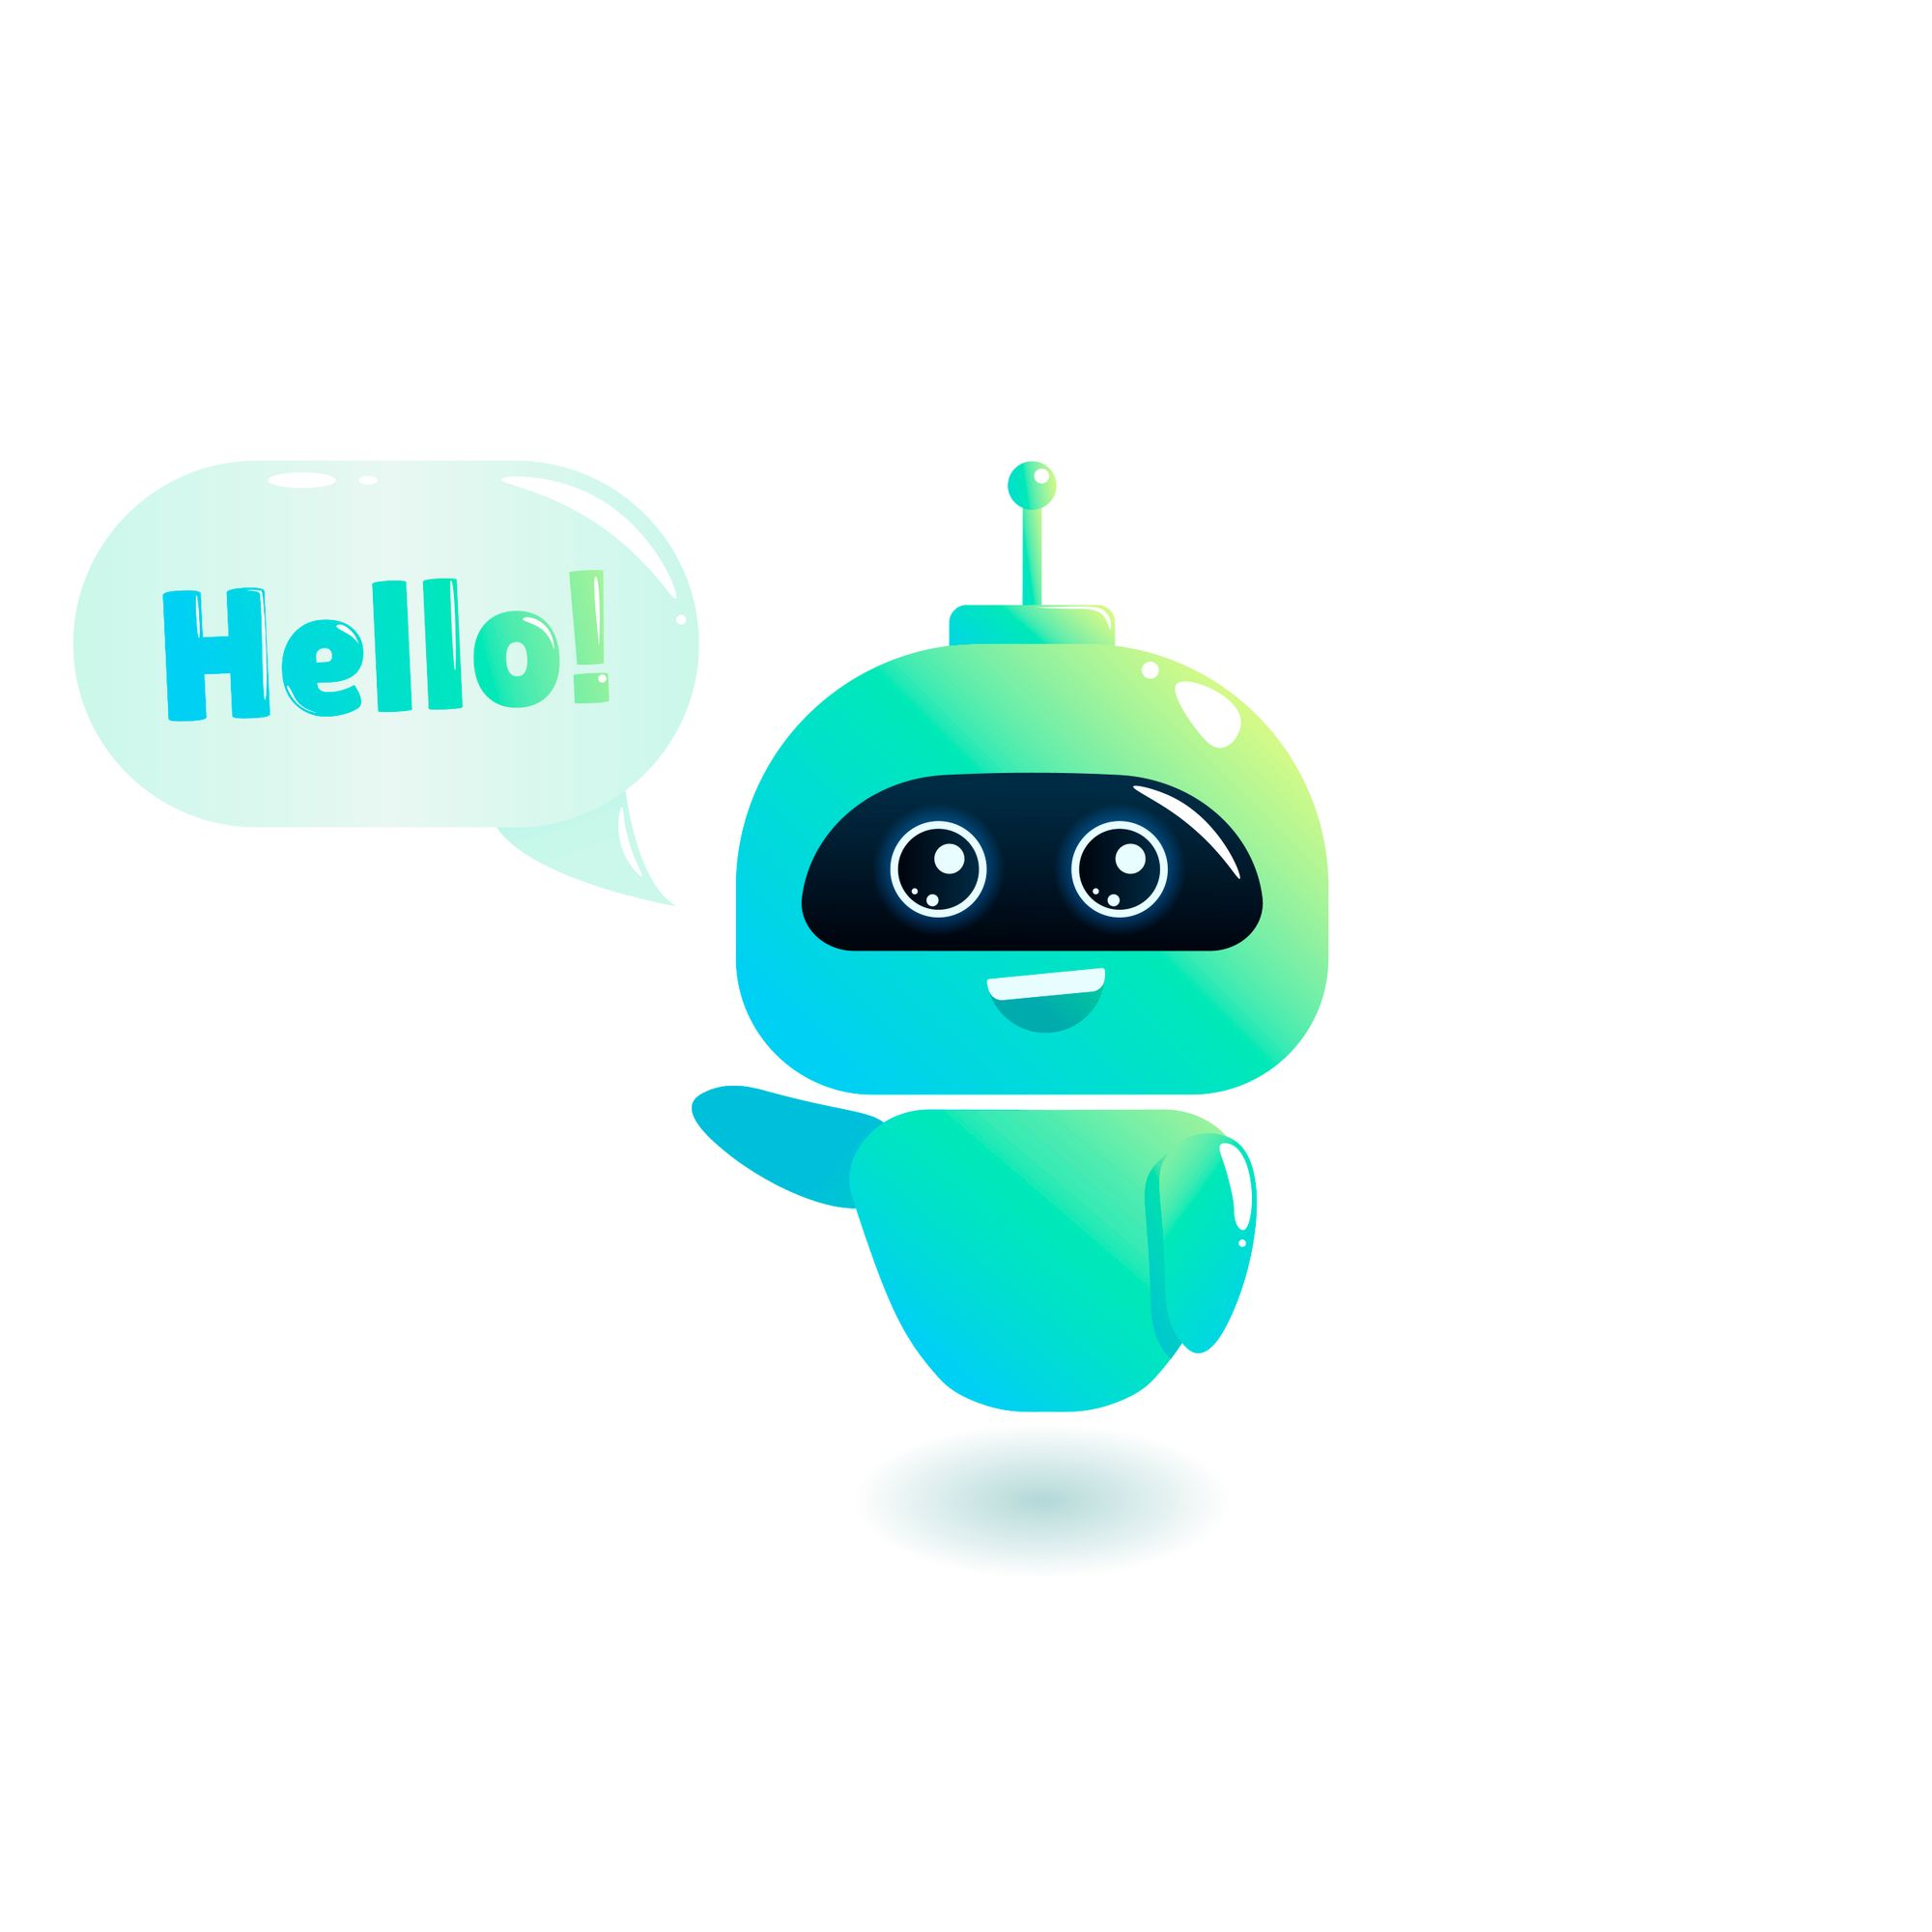 Top 5 things to consider when Designing your Chatbot